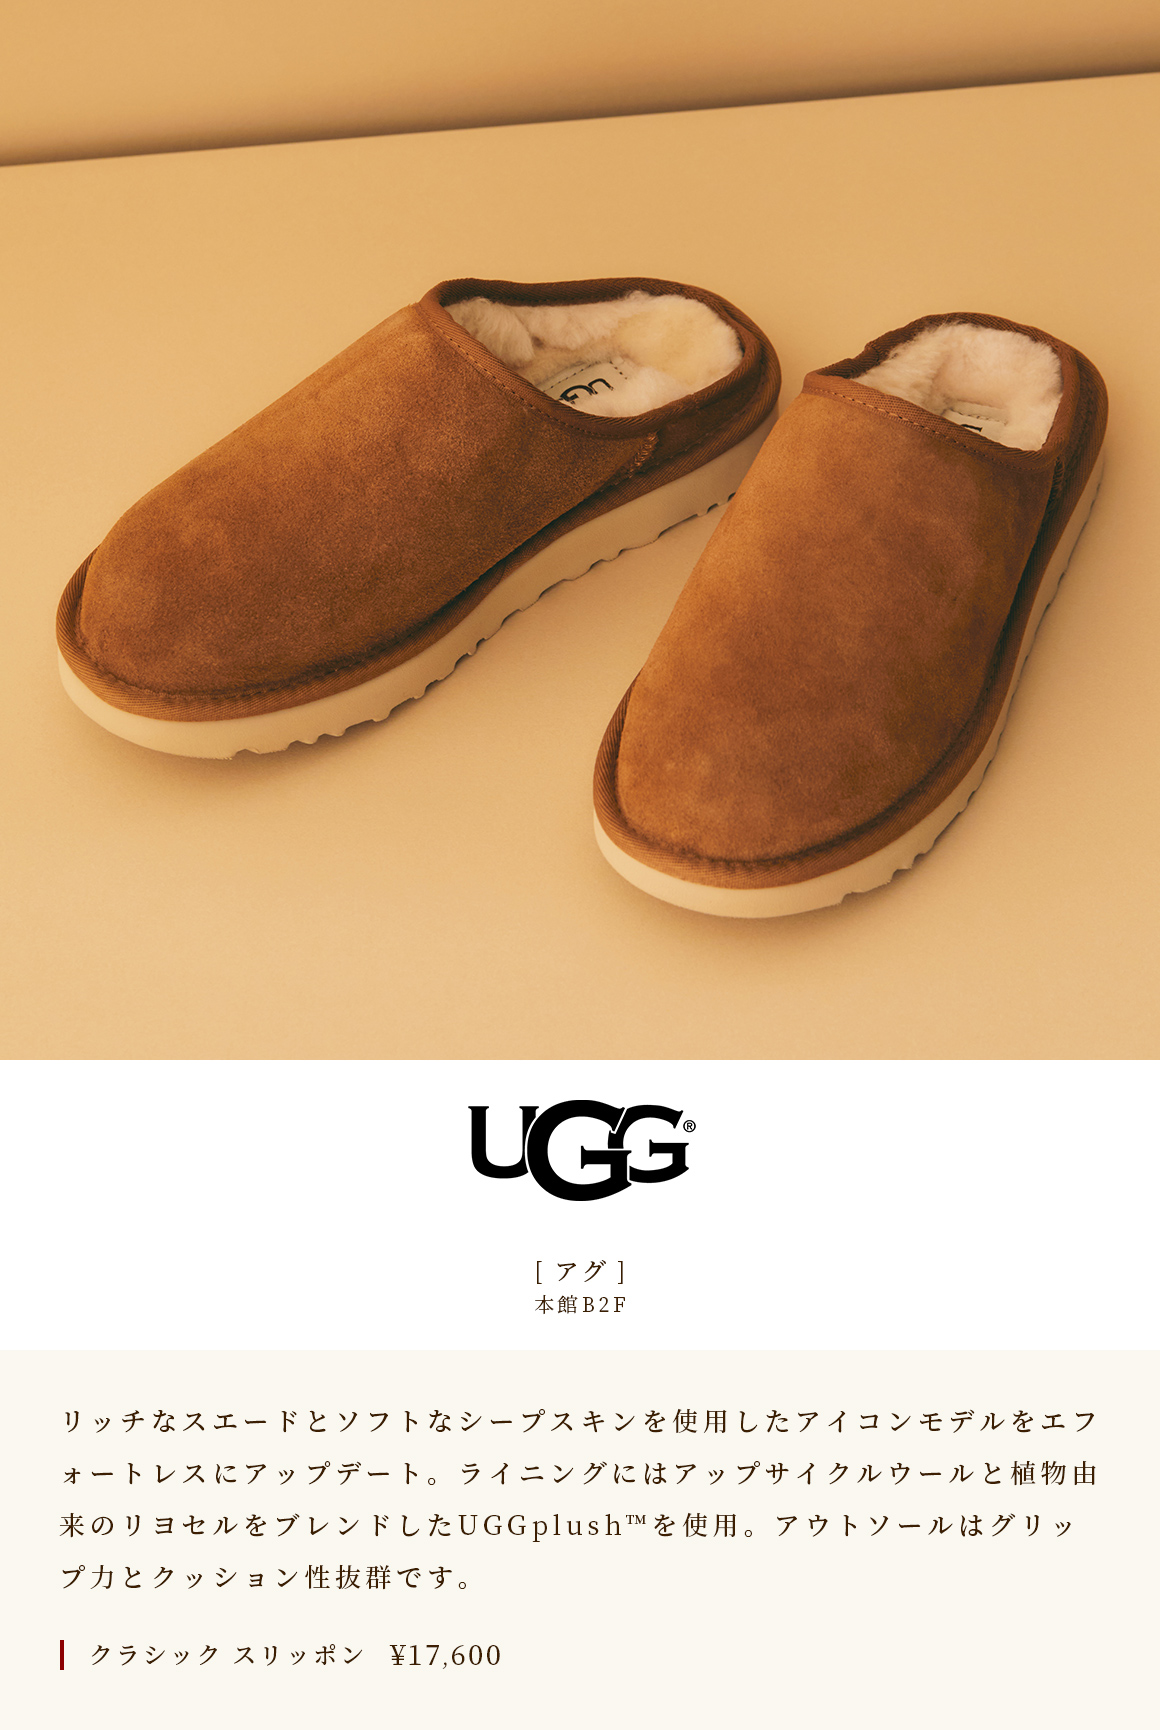 [Agu] Main Building B2F The icon model using rich suede and soft sheepskin has been updated to effortless. The lining uses UGGplush ™, which is a blend of upcycling wool and plant-derived lyocell. The outsole has excellent grip and cushioning. Classic slip-on ￥ 17,600